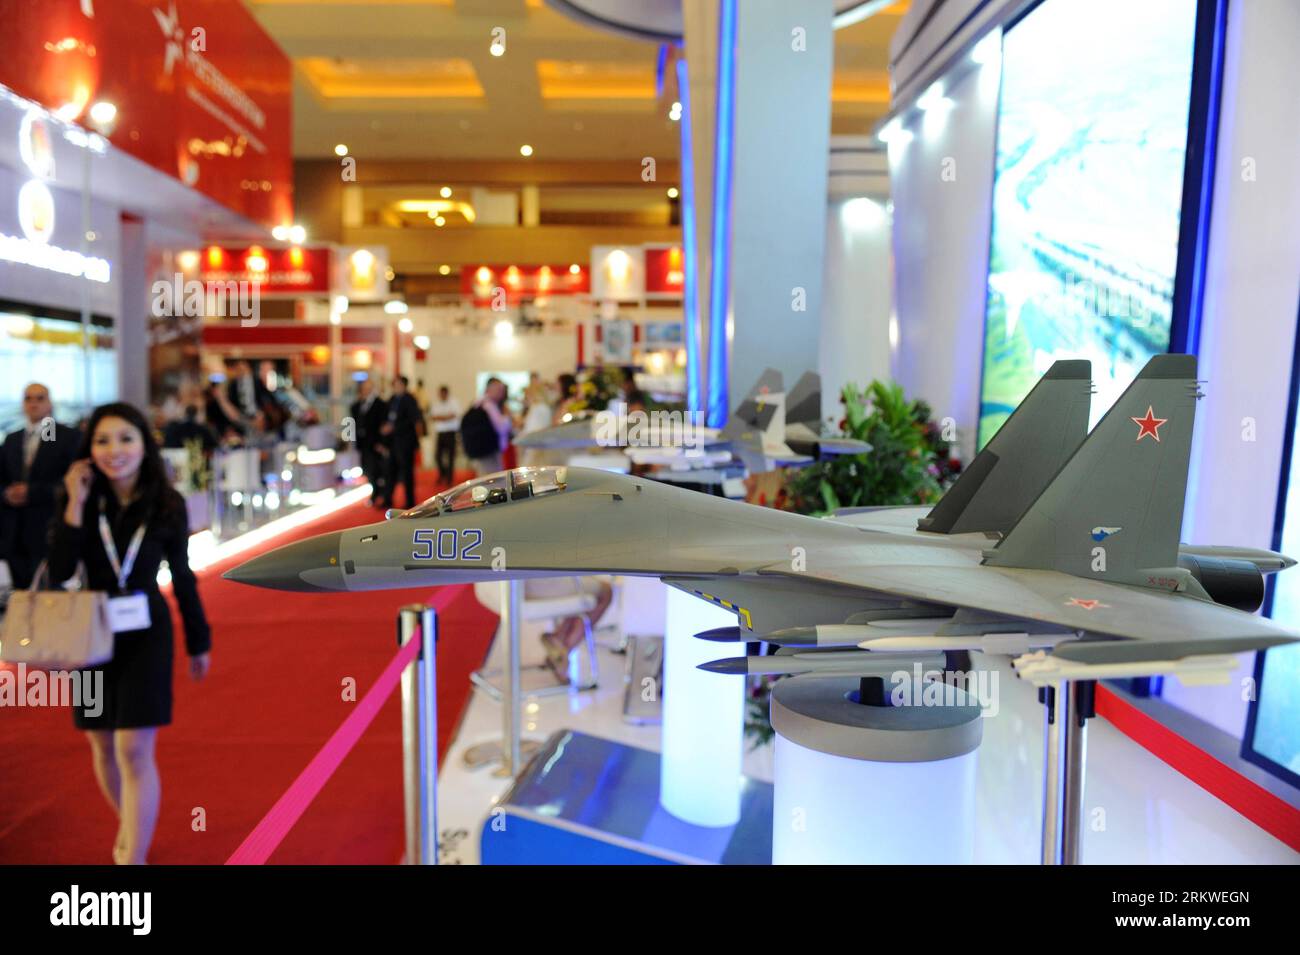 Bildnummer: 58673906  Datum: 07.11.2012  Copyright: imago/Xinhua (121107) -- JAKARTA, Nov. 7, 2012 (Xinhua) -- A Sukhoi fighter jet model is displayed at the Indodefence 2012 Expo and Forum held in Jakarta International Expo Kemayoran in Jakarta, Indonesia, Nov. 7, 2012. As many as 603 firms from 42 countries and areas attended the Indodefence 2012 Expo and Forum Wednesday, one of the biggest industry gatherings in Southeast Asia this year. (Xinhua/Veri Sanovri) (zjl) INDONESIA-JAKARTA-INDODEFENCE 2012 PUBLICATIONxNOTxINxCHN Wirtschaft Rüstung Industrie Rüstungsindustrie Messe Rüstungsmesse Mi Stock Photo